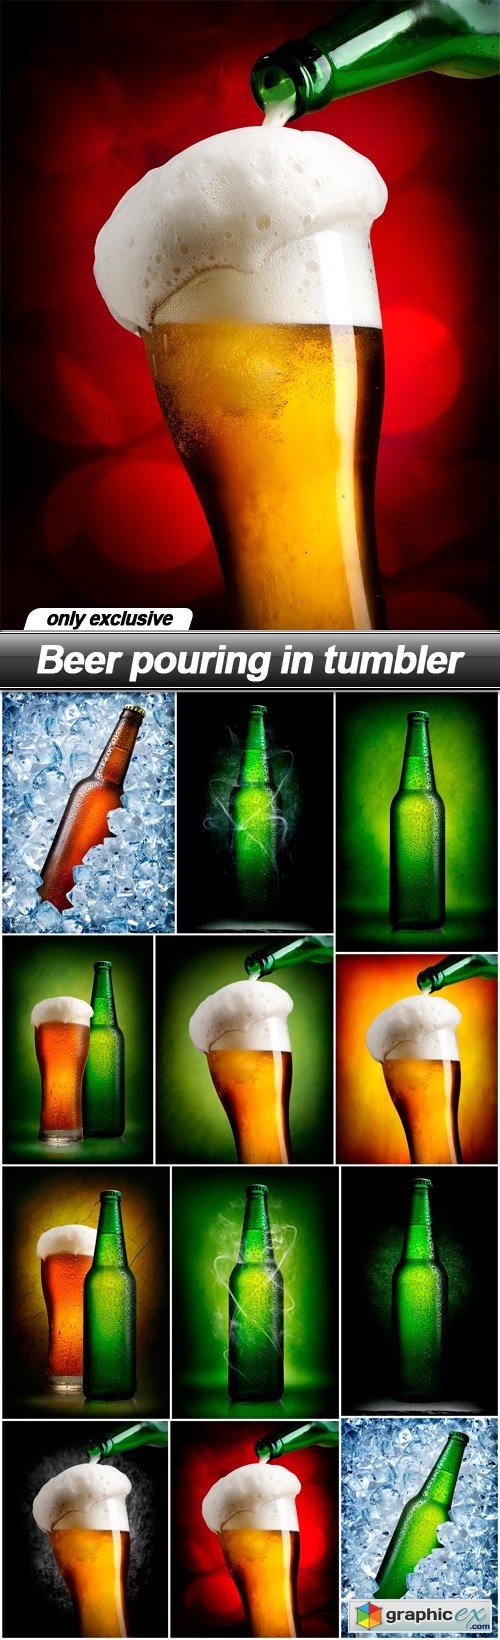 Beer pouring in tumbler - 12 UHQ JPEG